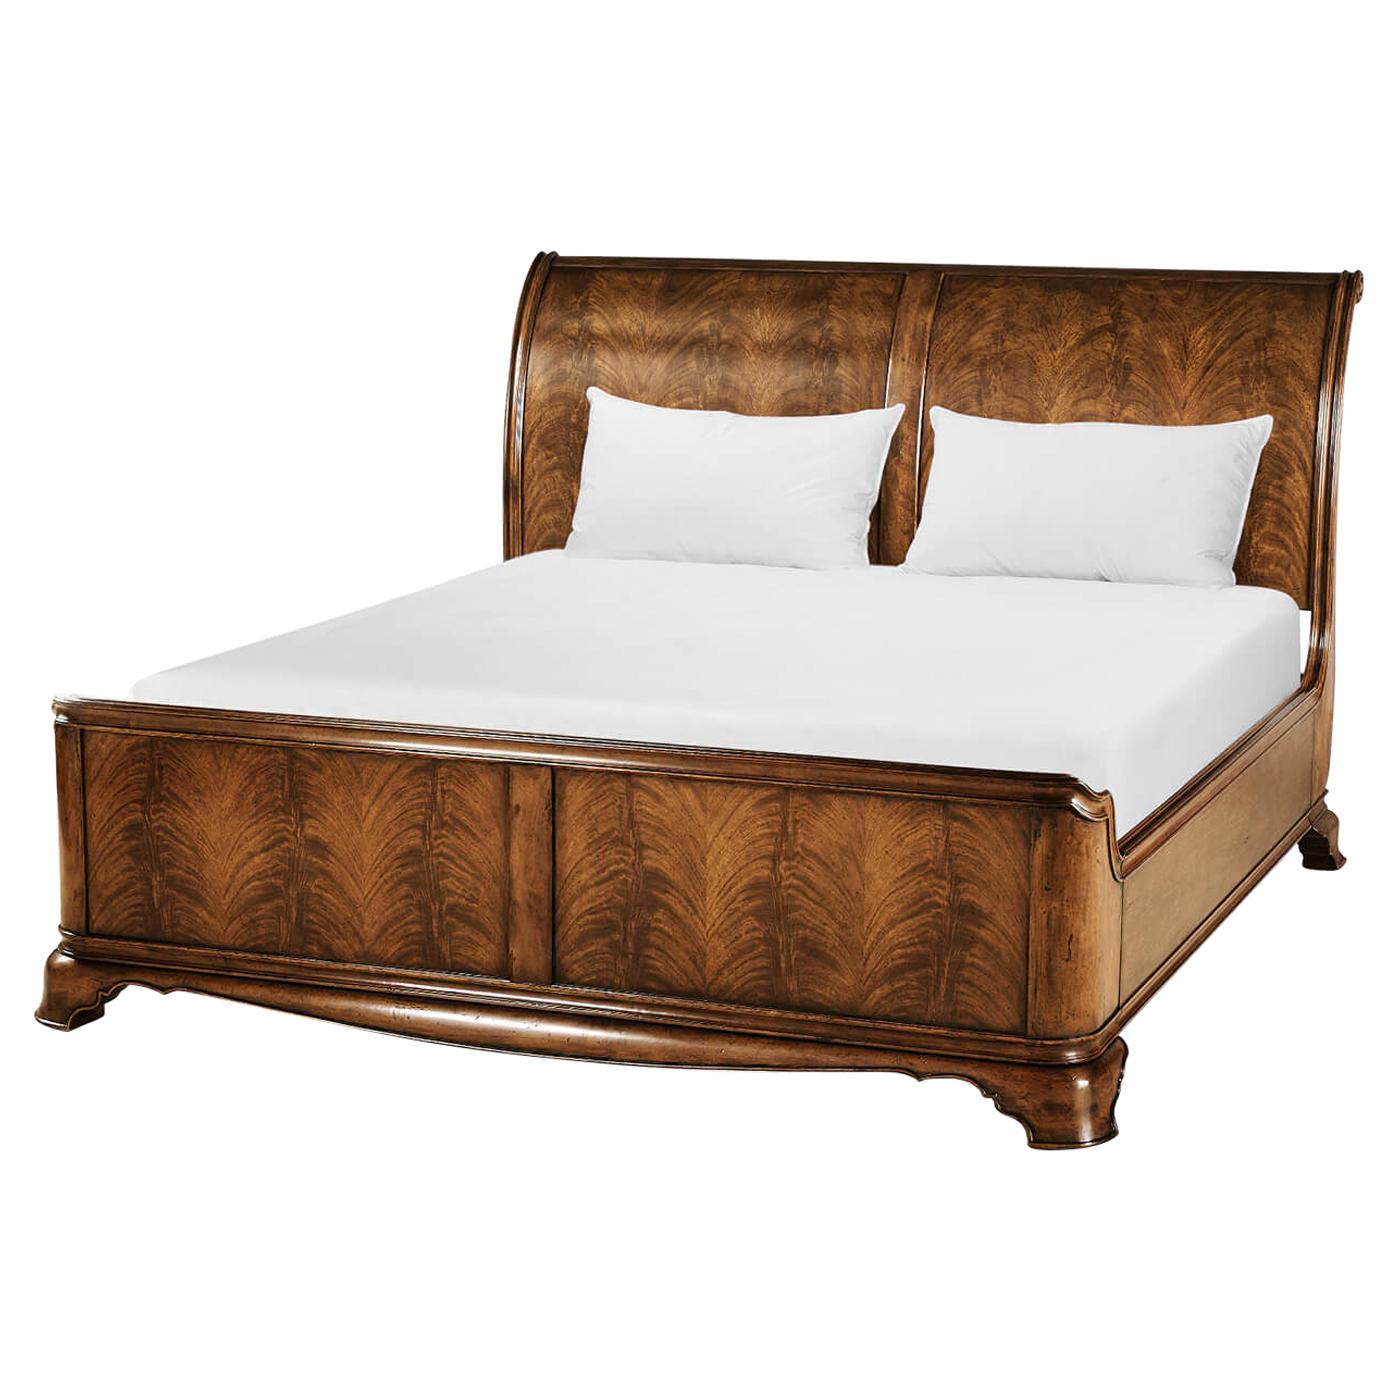 French Walnut Sleigh Bed King At 1stdibs, Sleigh King Platform Bed